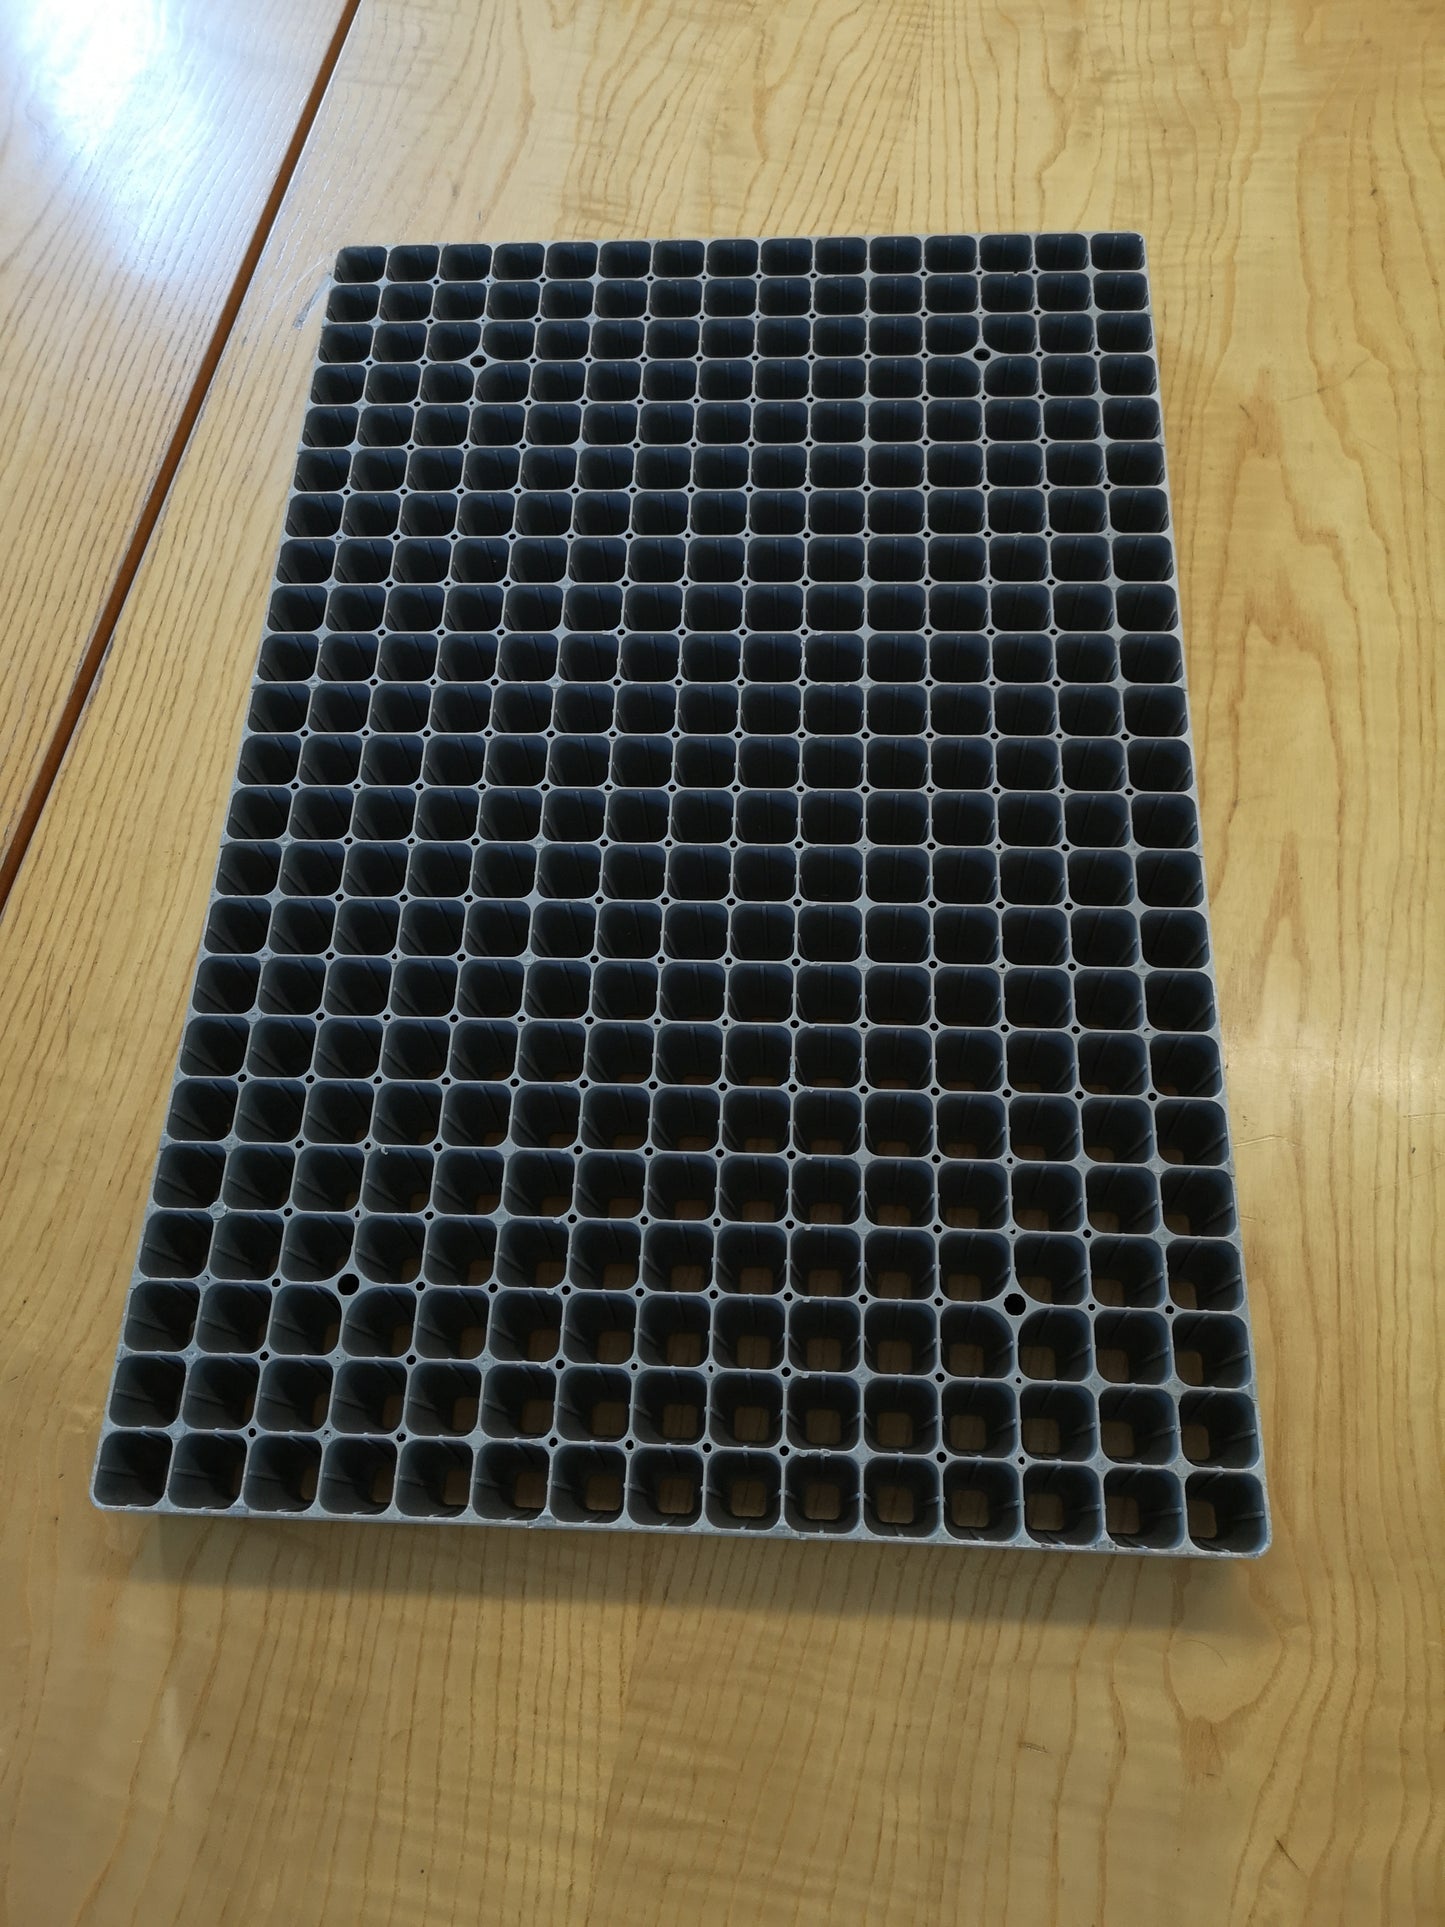 345 Cell Seed Starter Plant Tray - Plastic Reusable Long life